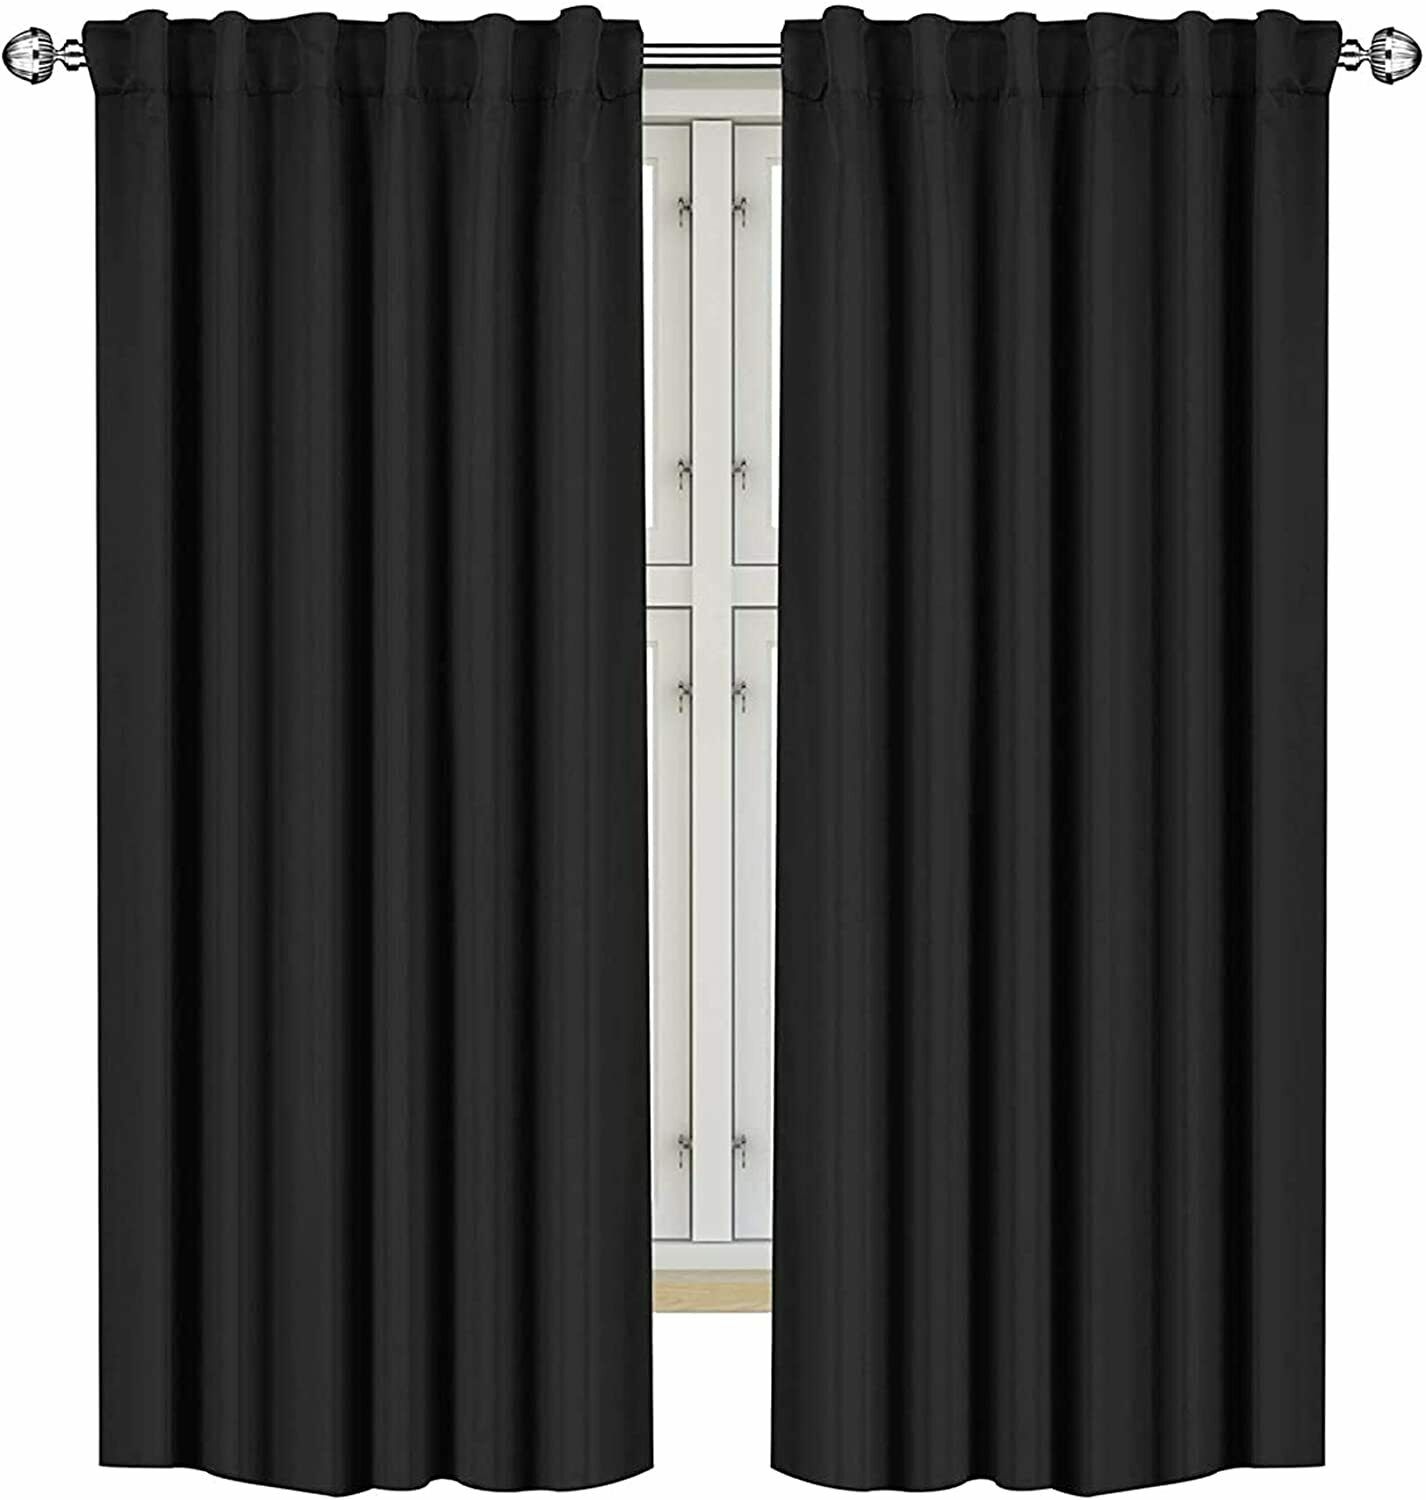 2 Panels Blackout Curtain 52x63 Inch Room Darkening Curtains Loops Utopia Home